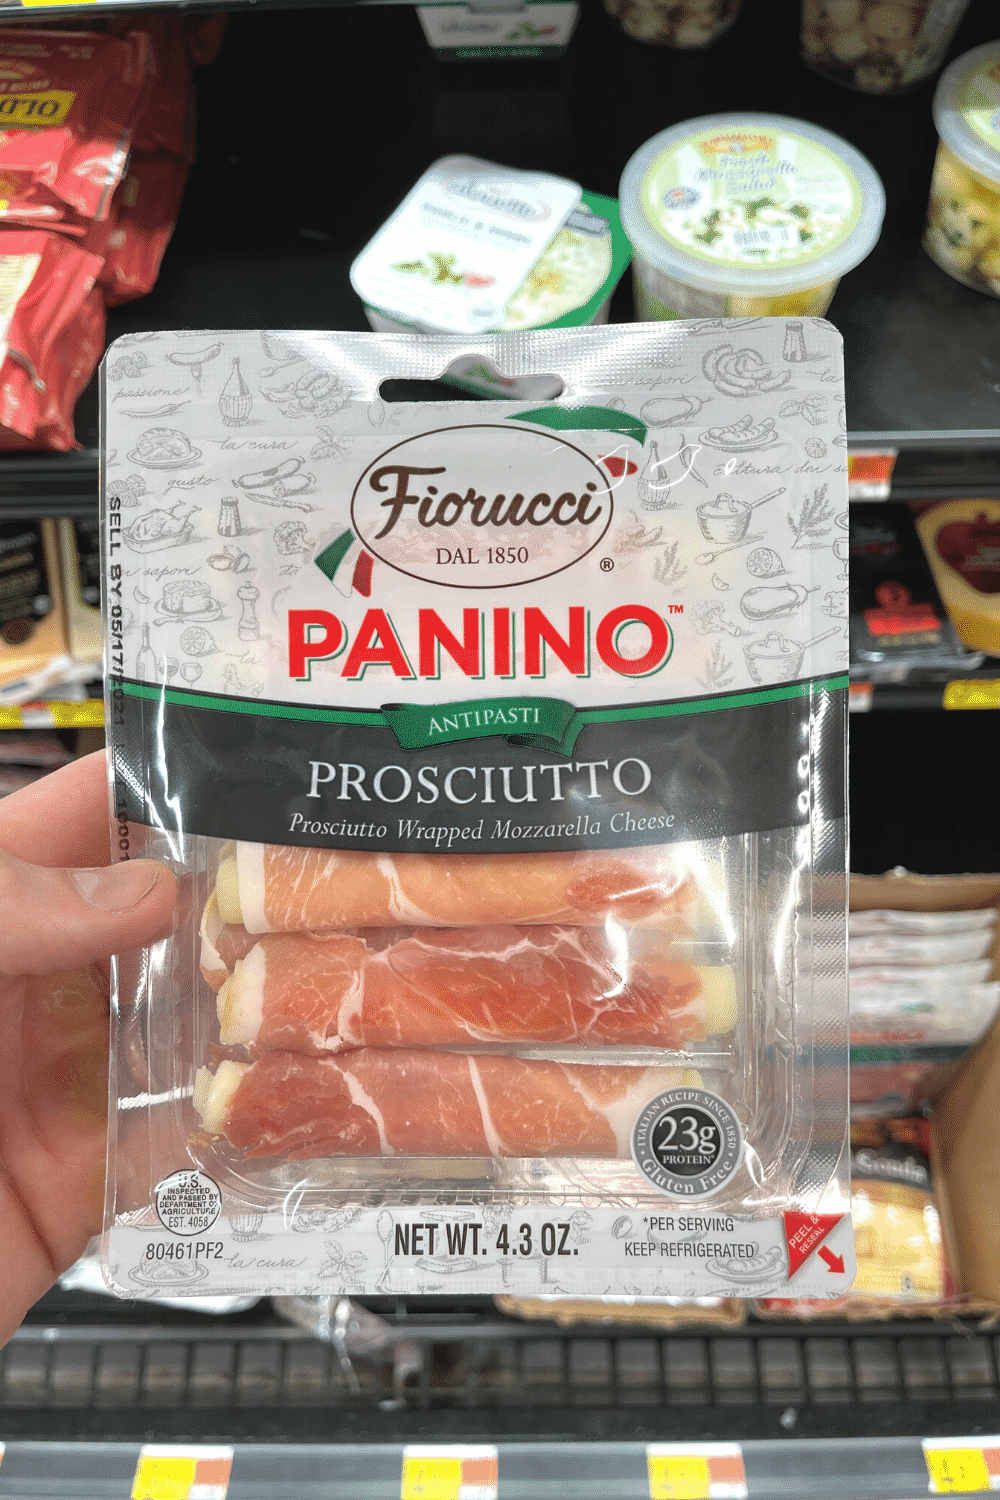 A hand holding a package of paninos.